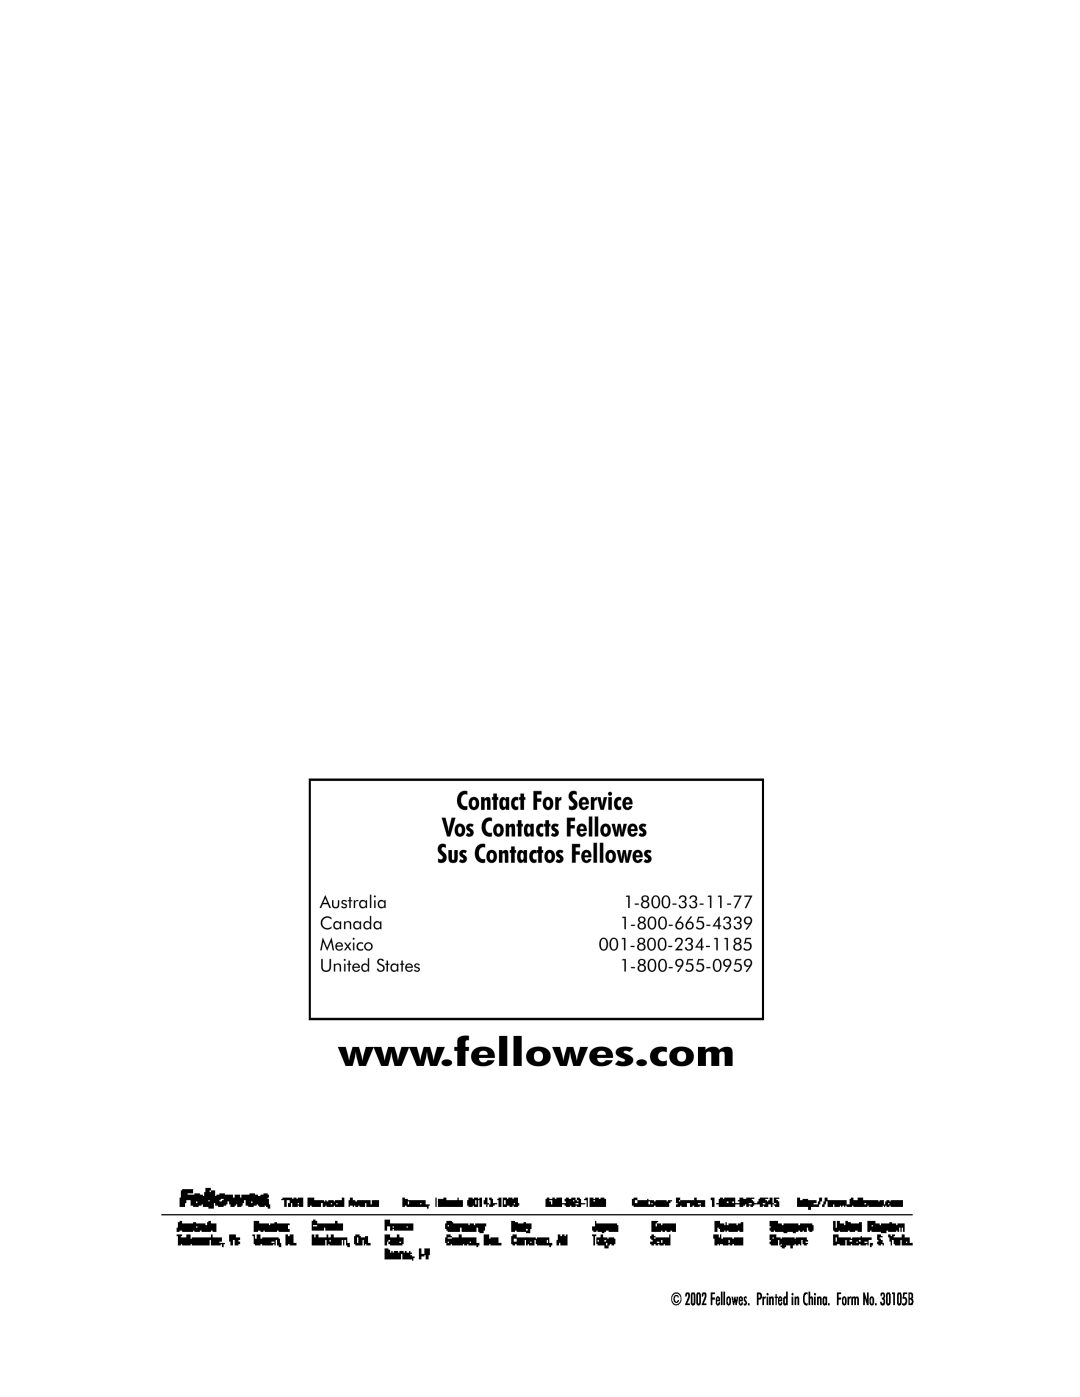 Fellowes S70-2 manual Contact For Service, Vos Contacts Fellowes, Sus Contactos Fellowes, Australia, 1-800-33-11-77, Canada 